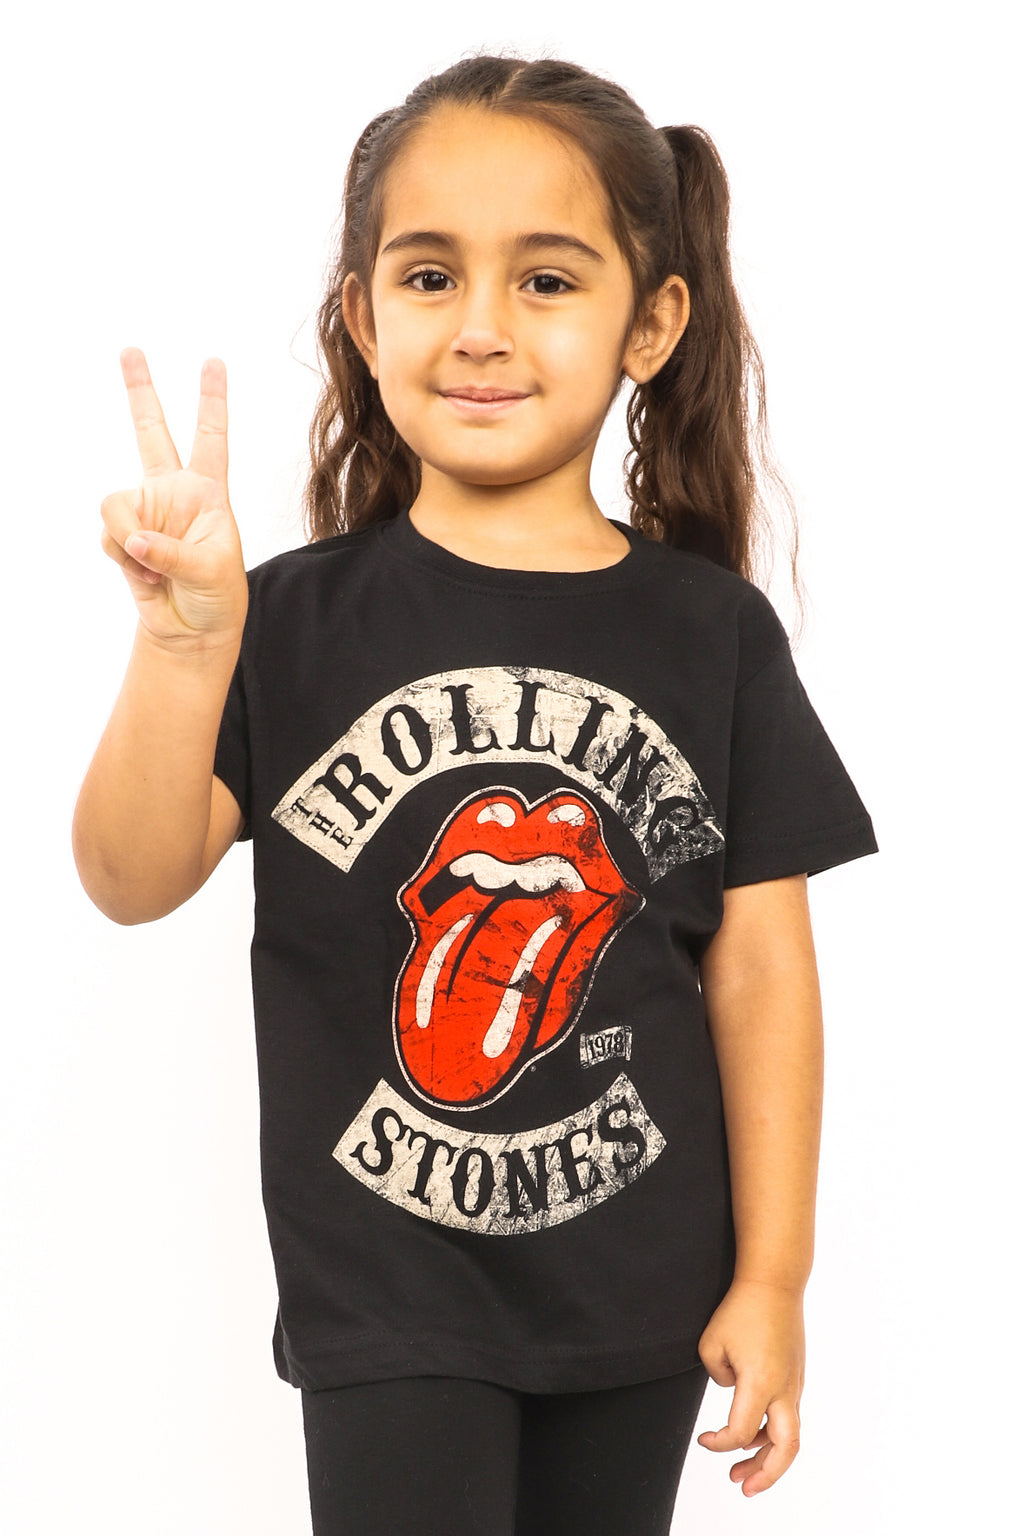 Angeles Tongue Eye - Stones T-Shirt Candy Rolling Kid\'s Girls) Logo (Boys Los - – and White